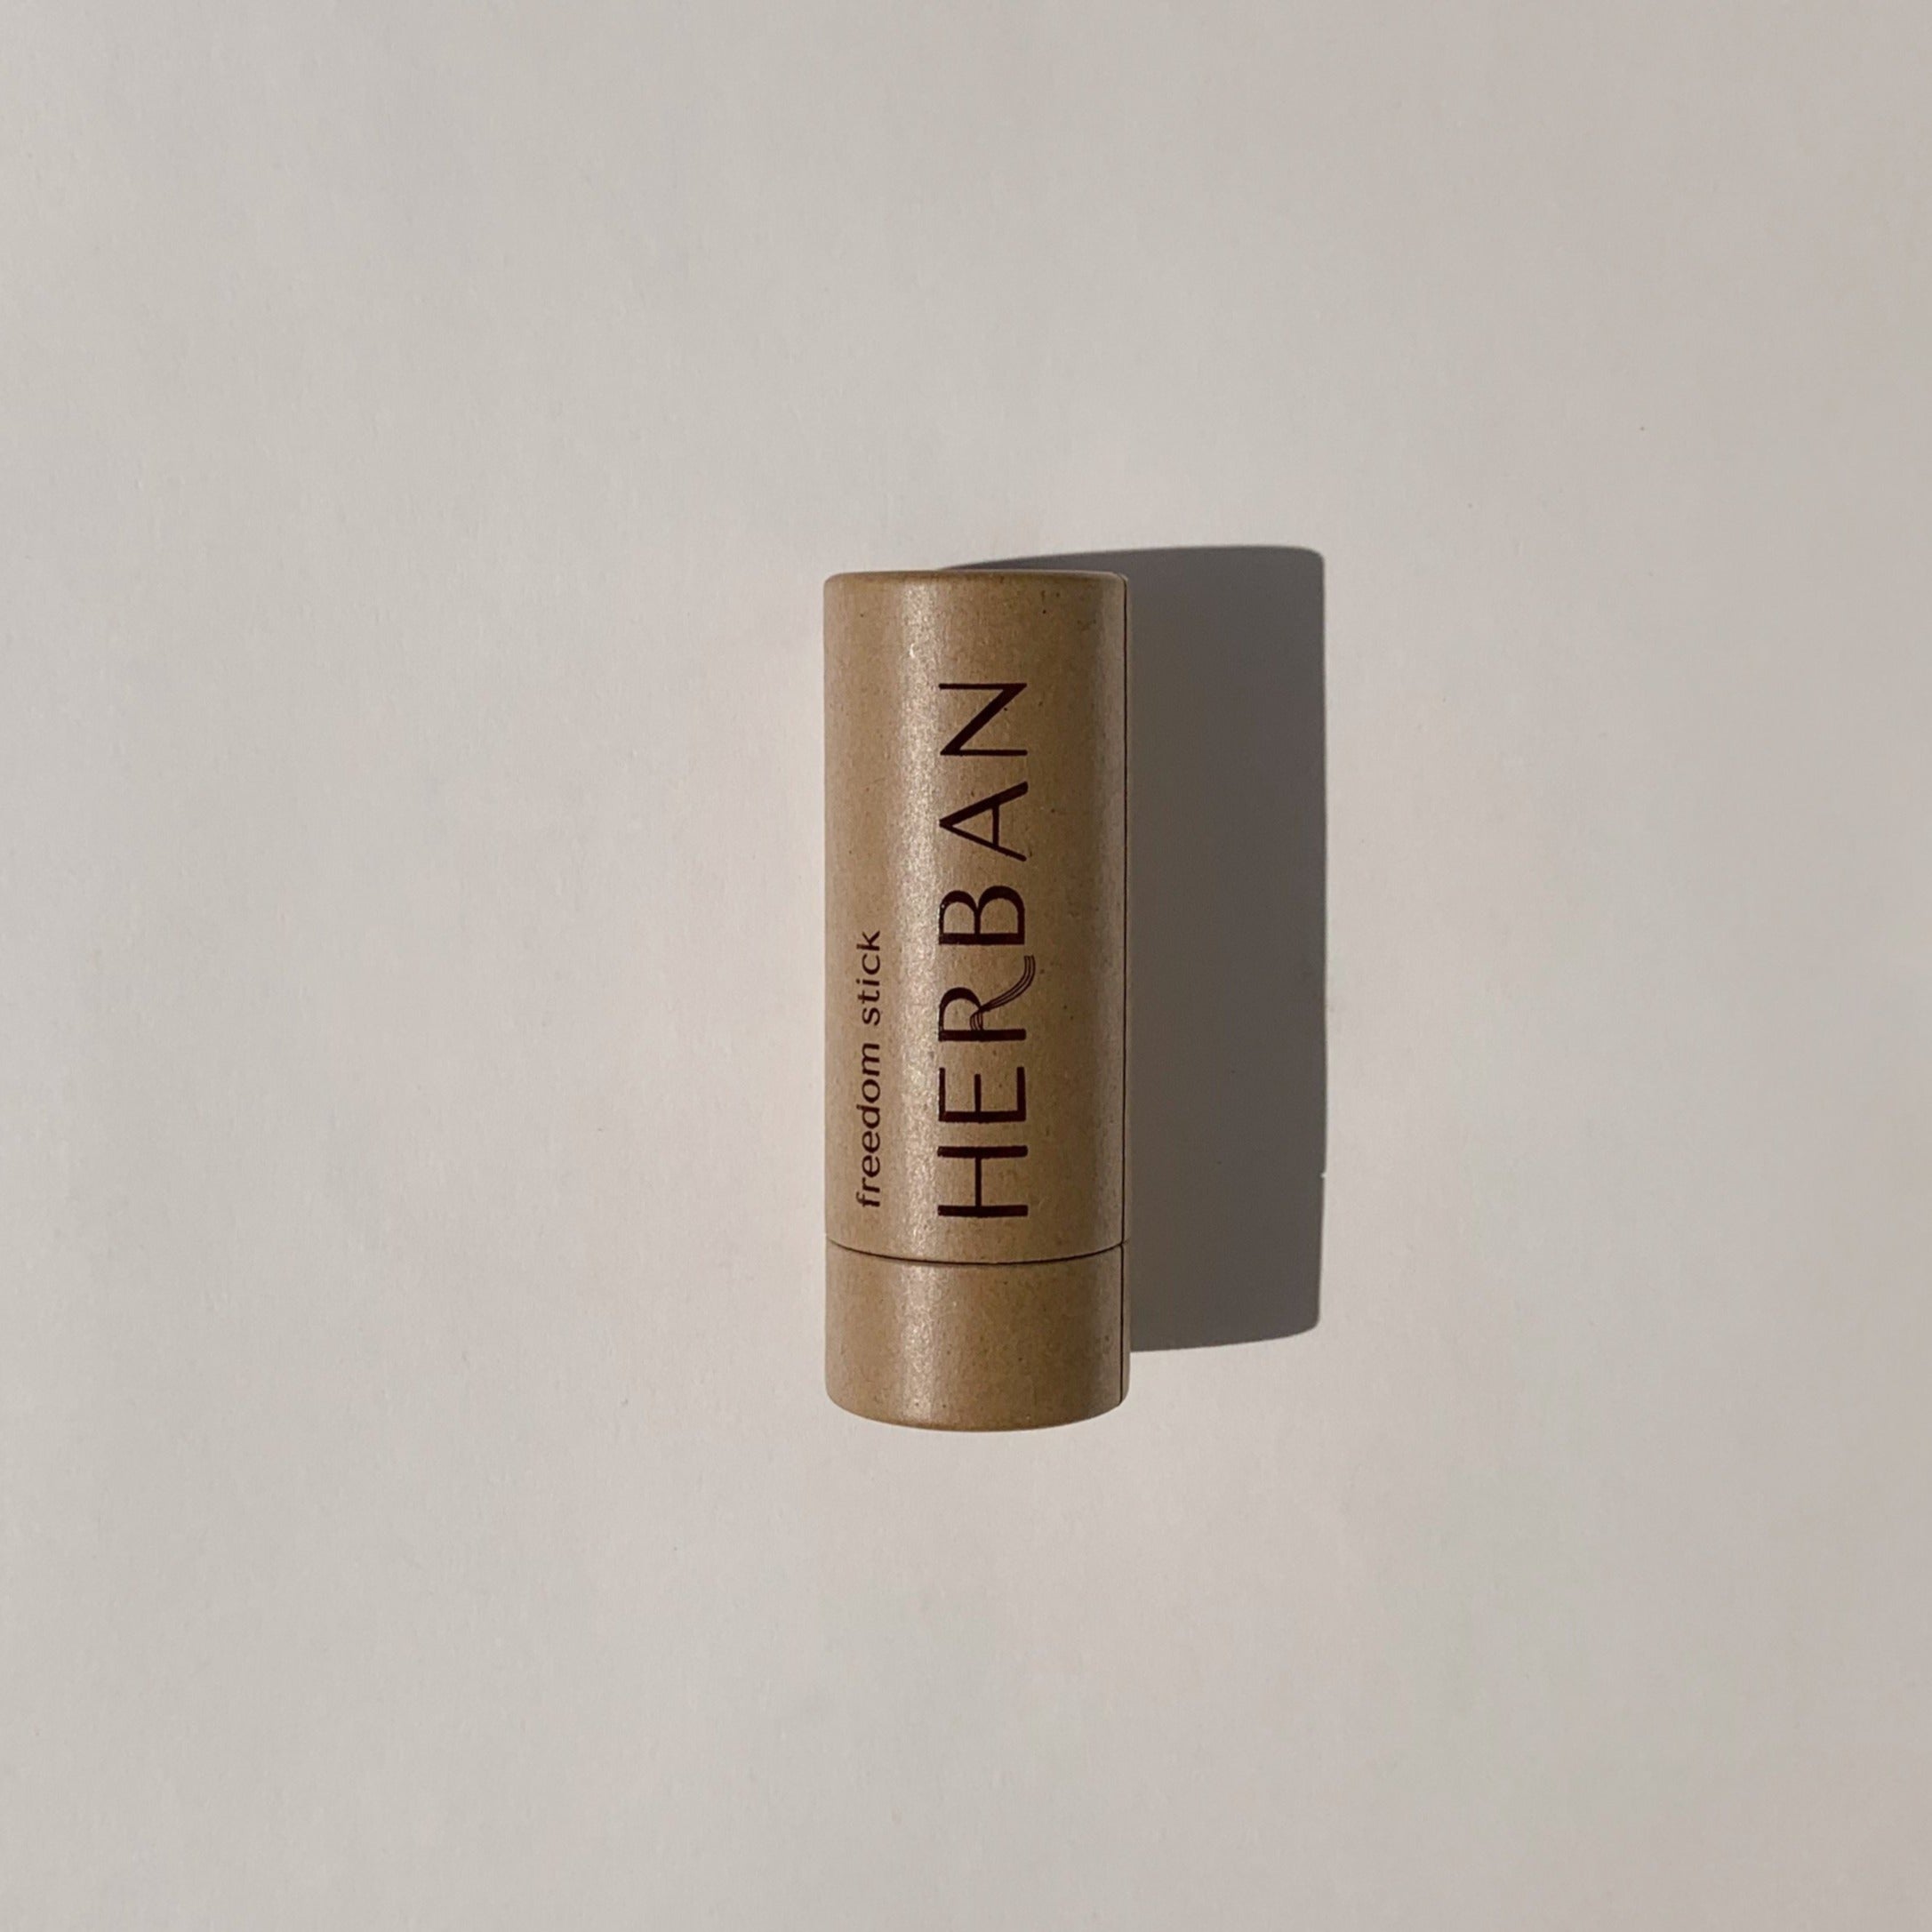 Herban's Freedom Stick in plastic free, compostable packaging and is Aluminum and Baking soda free